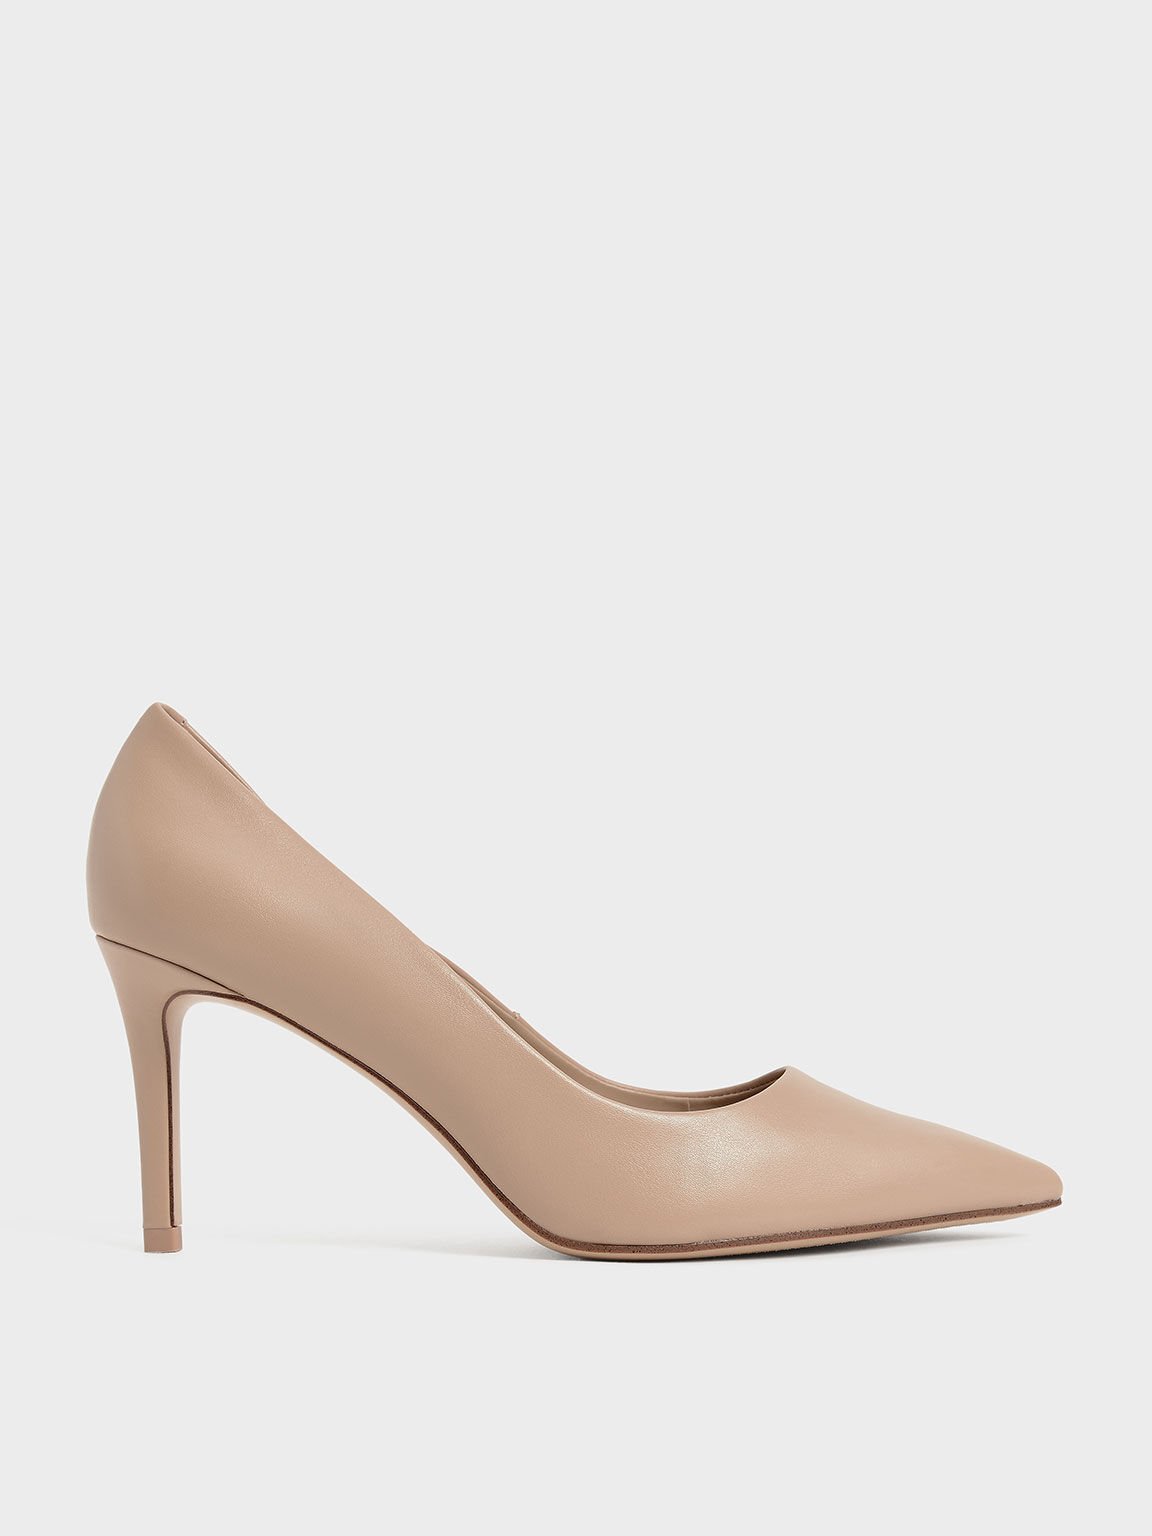 Emmy Pointed-Toe Pumps, Nude, hi-res